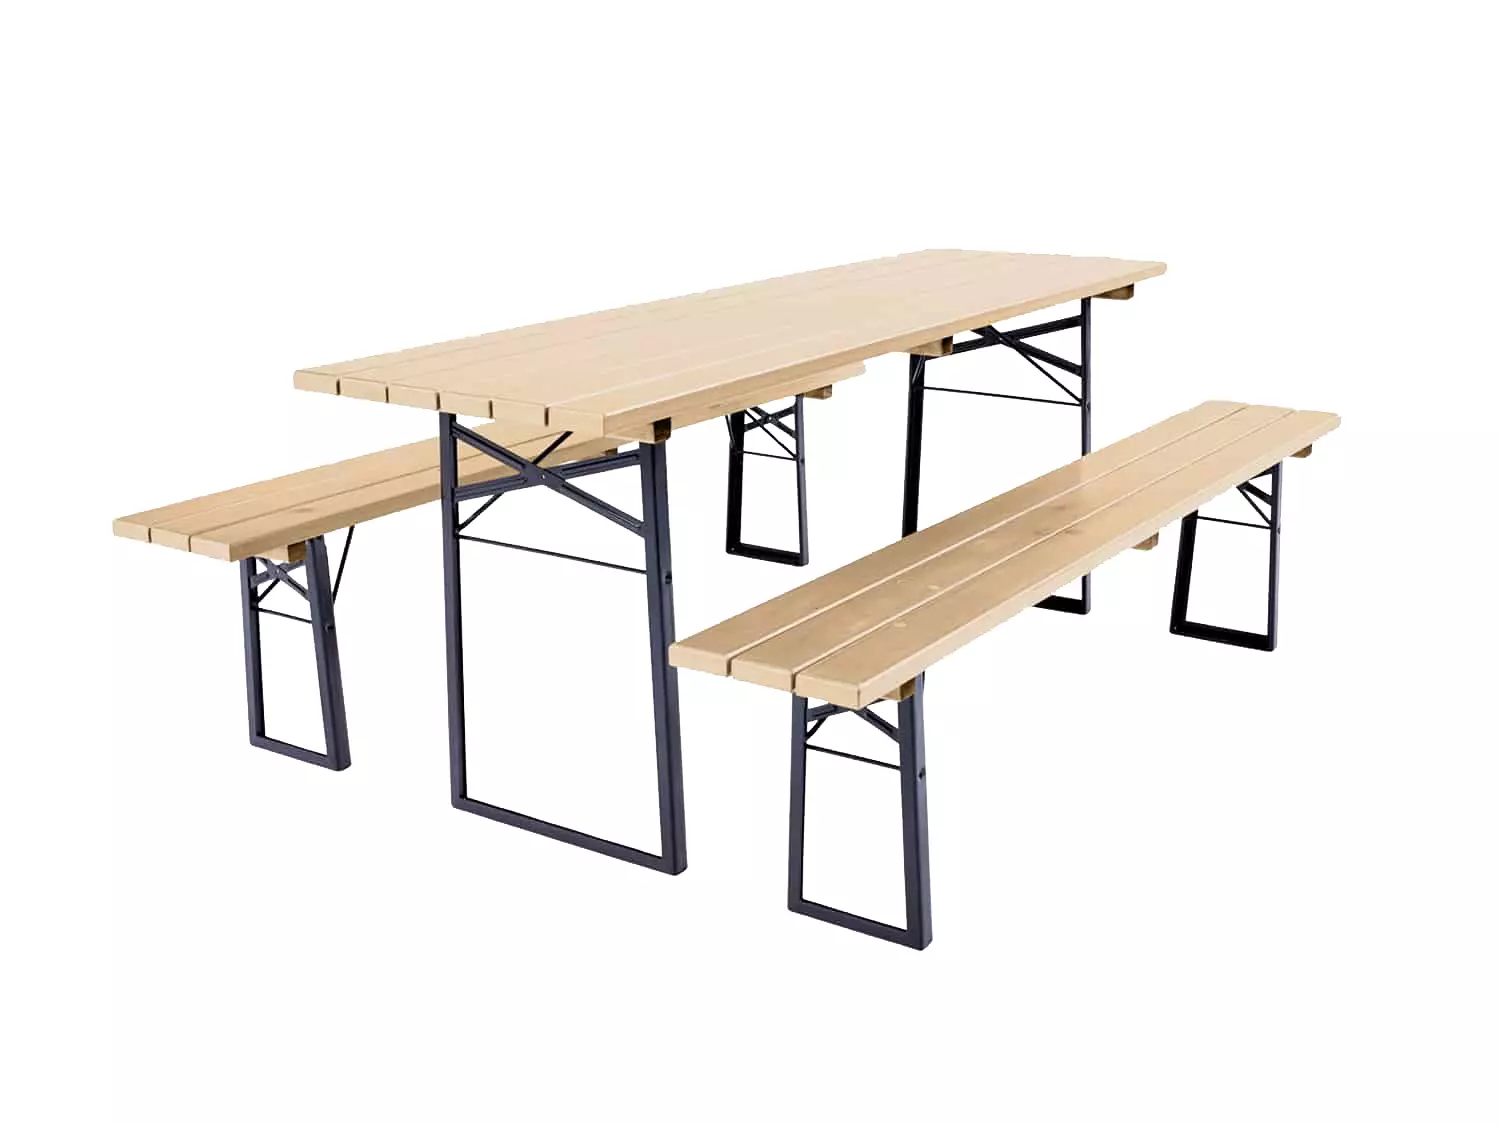 The Patio | Wooden Patio Table